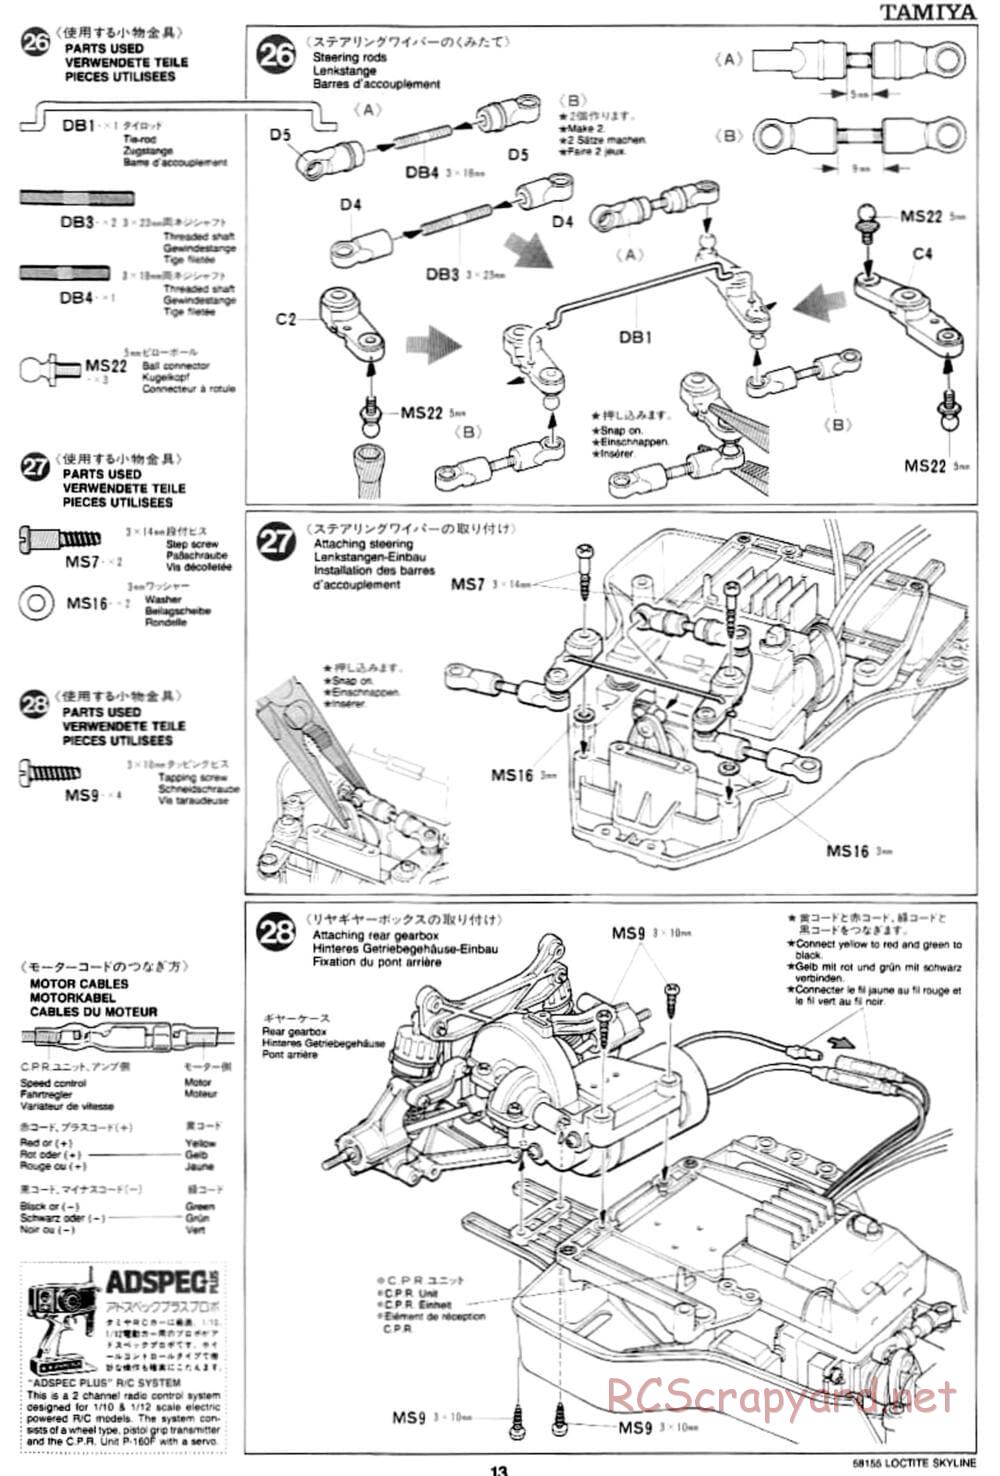 Tamiya - Loctite Nissan Skyline GT-R N1 - TA-02 Chassis - Manual - Page 13